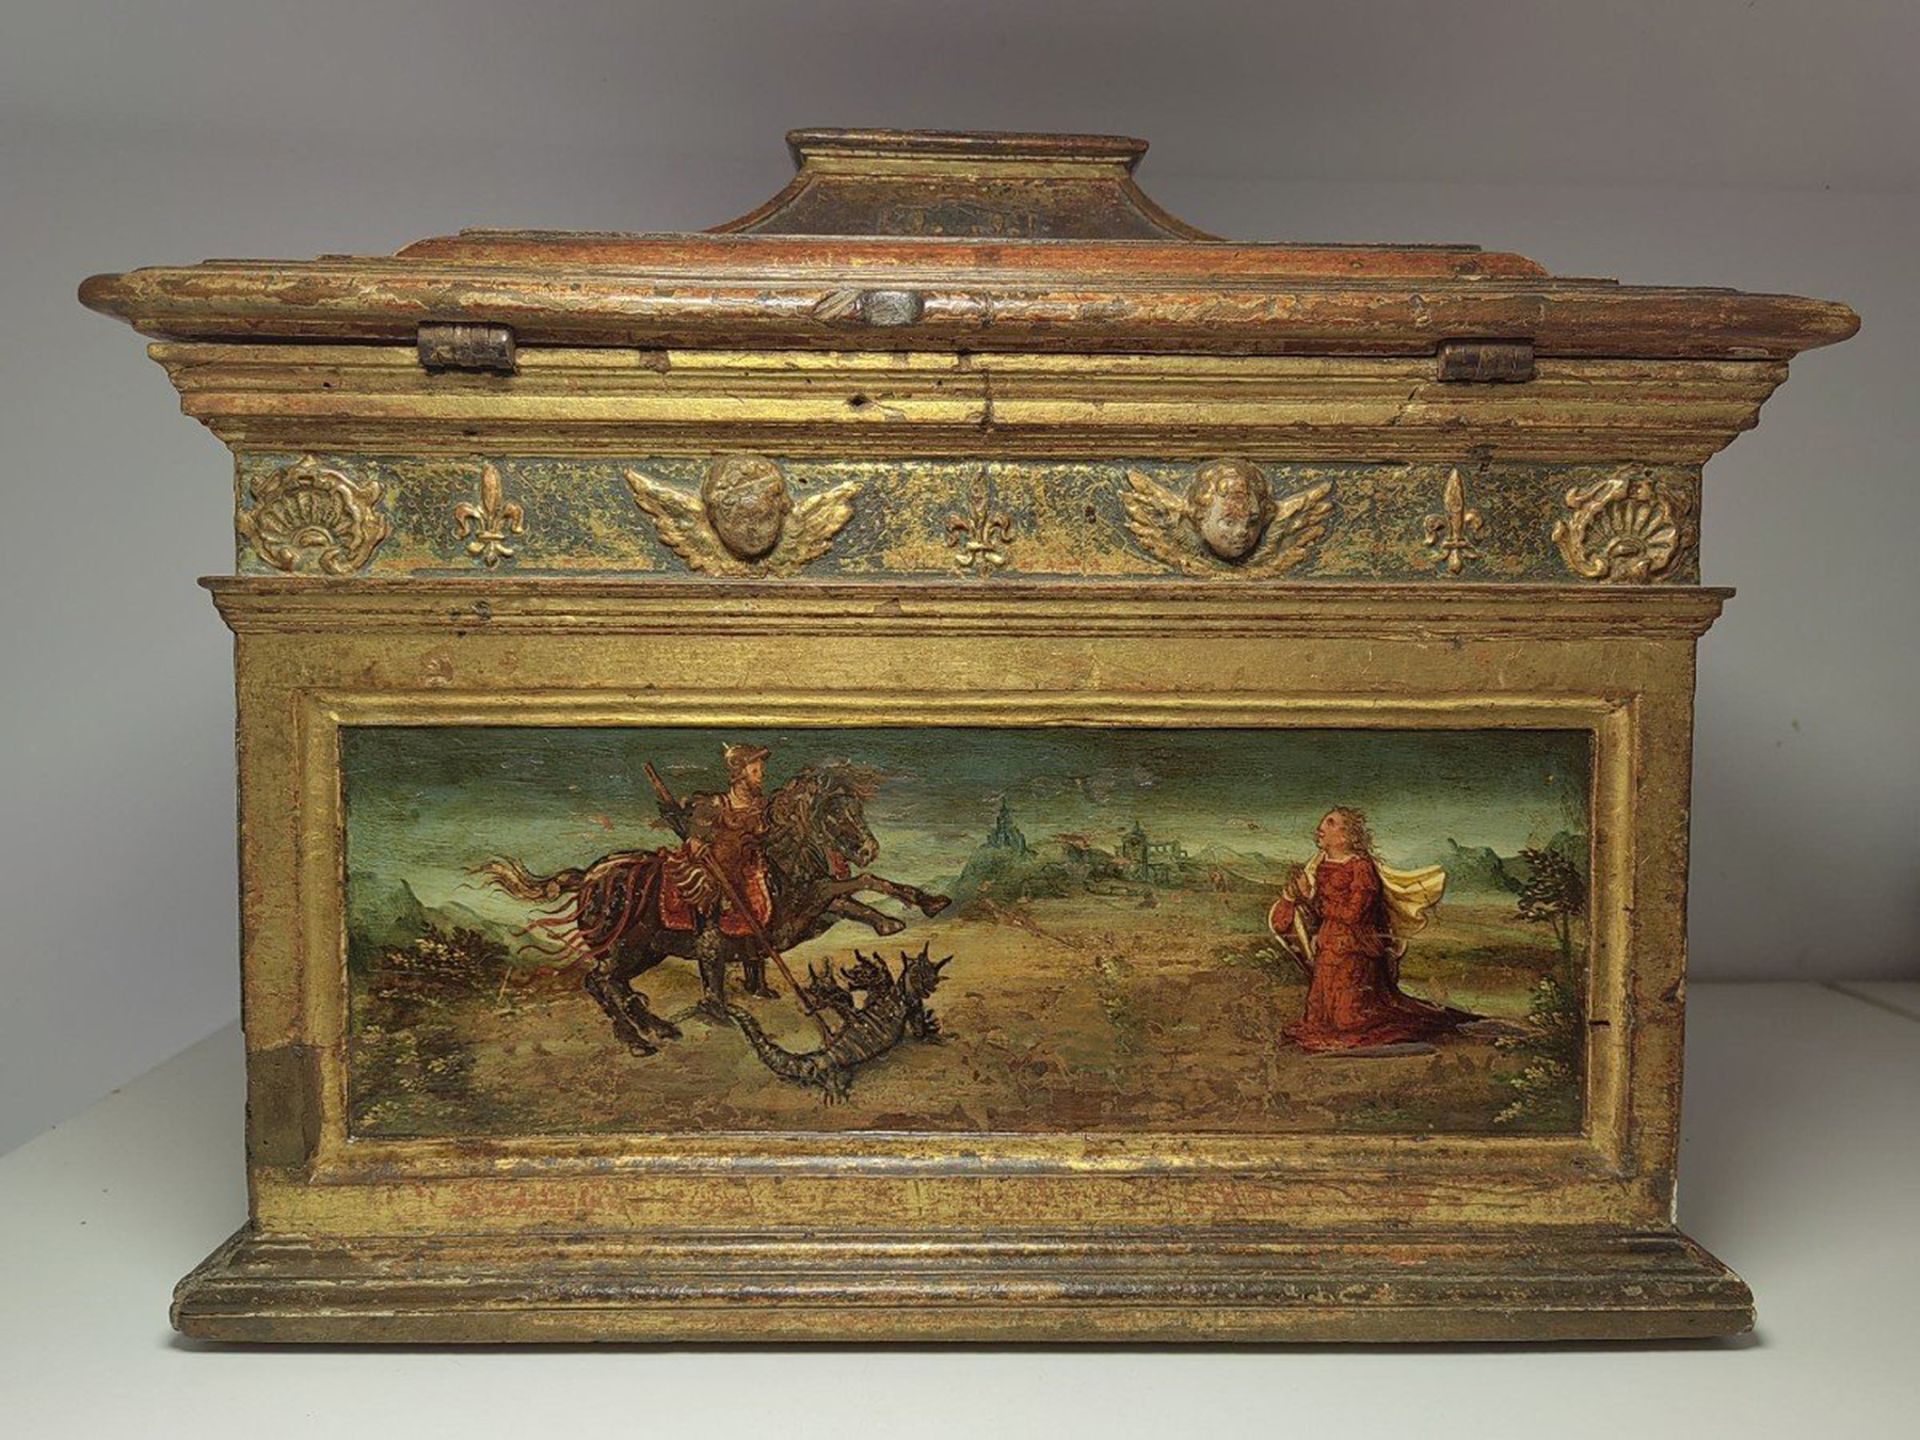 Rare Italian Medical Chest of the Renaissance, Milan or Vizcaya, made by the house of Medinaceli, he - Image 8 of 10